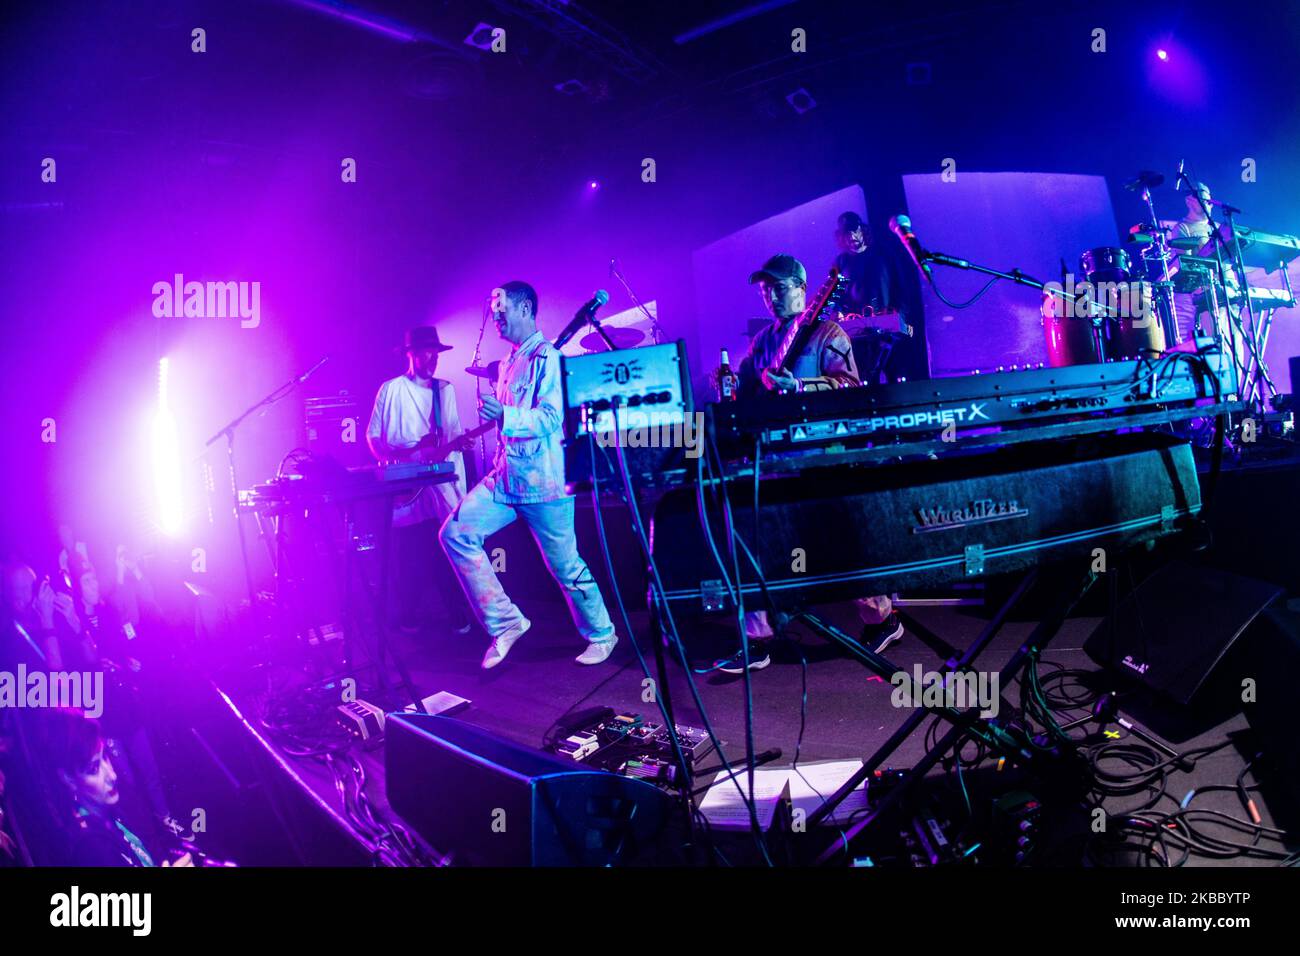 Alexis Taylor of English synth-pop band Hot chip performs at Alcatraz in Milano, Italy, on November 30 2019. The group consists of multi-instrumentalists Alexis Taylor, and Felix Martin. They are occasionally supplemented by Rob Smoughton and Sarah Jones for live performances and studio recordings. The group primarily produces music in the synth-pop and alternative dance genres, drawing influences from house and disco. (Photo by Mairo Cinquetti/NurPhoto) Stock Photo